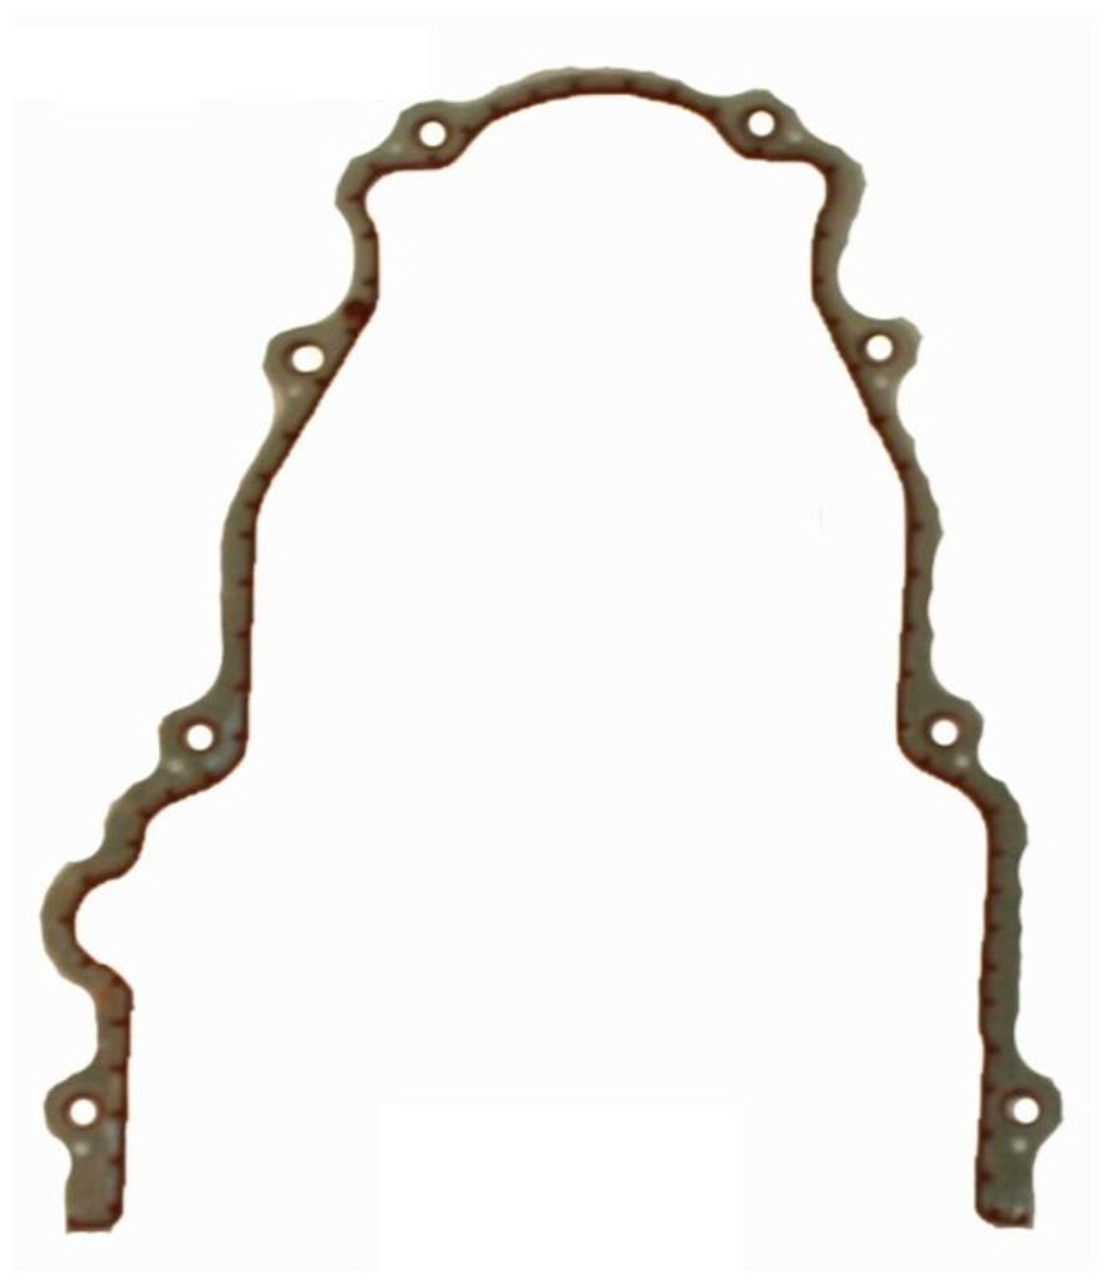 2013 Chevrolet Express 2500 6.0L Engine Timing Cover Gasket TCG293-A -822